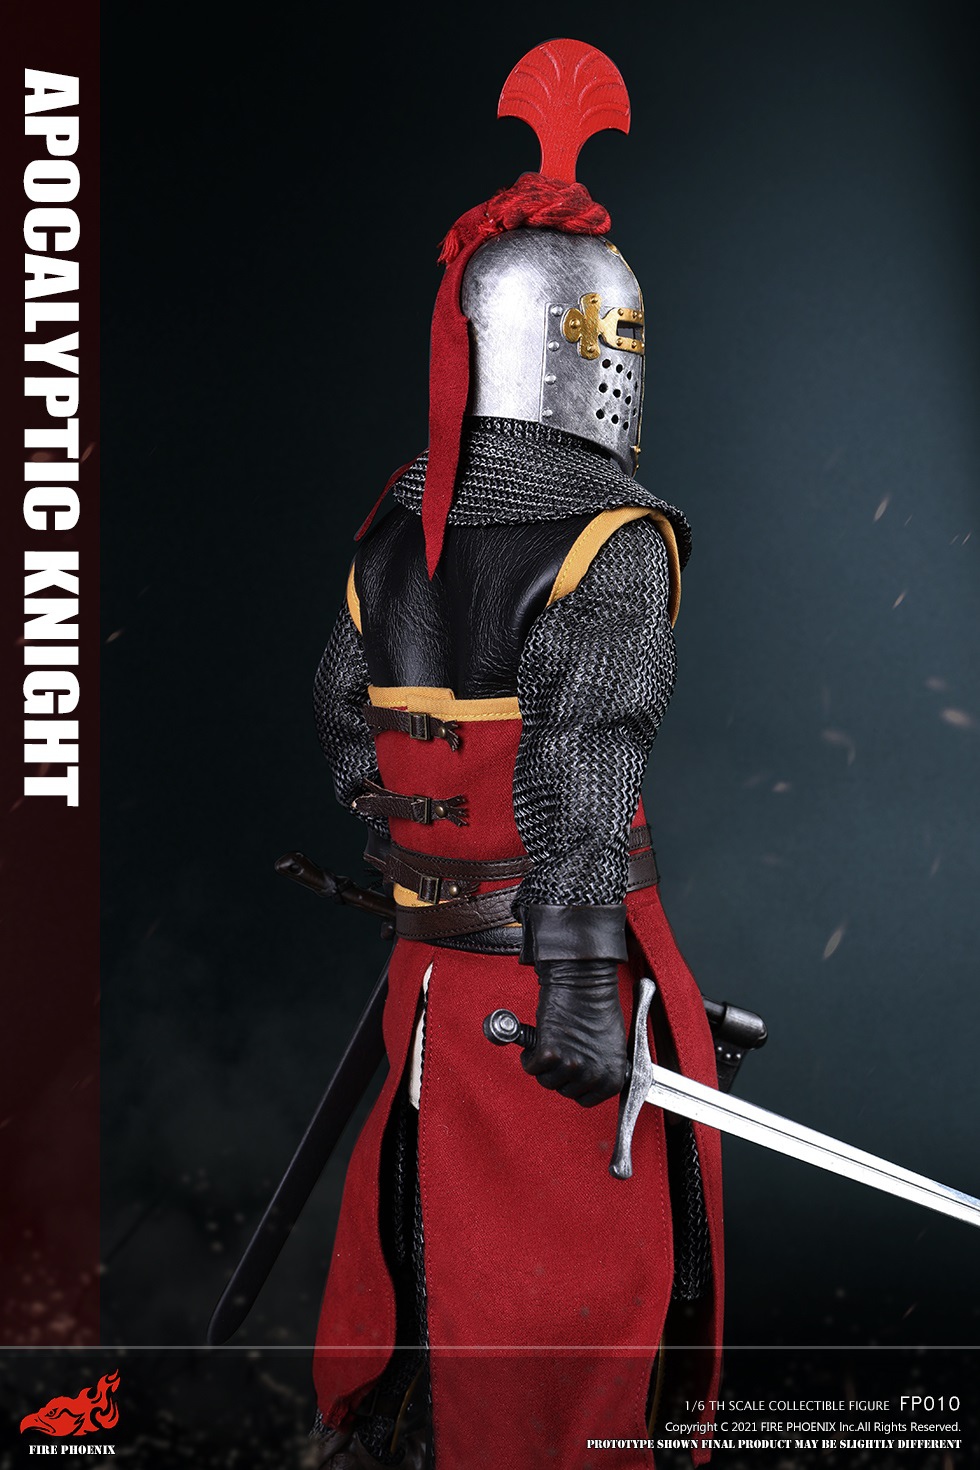 ApocalypticKnight - NEW PRODUCT: FIRE PHOENIX: 1/6 Die Cast Alloy - Arrogant Knight, Fearless Knight, Fury Knight, Doom Knight and Suits 20144210